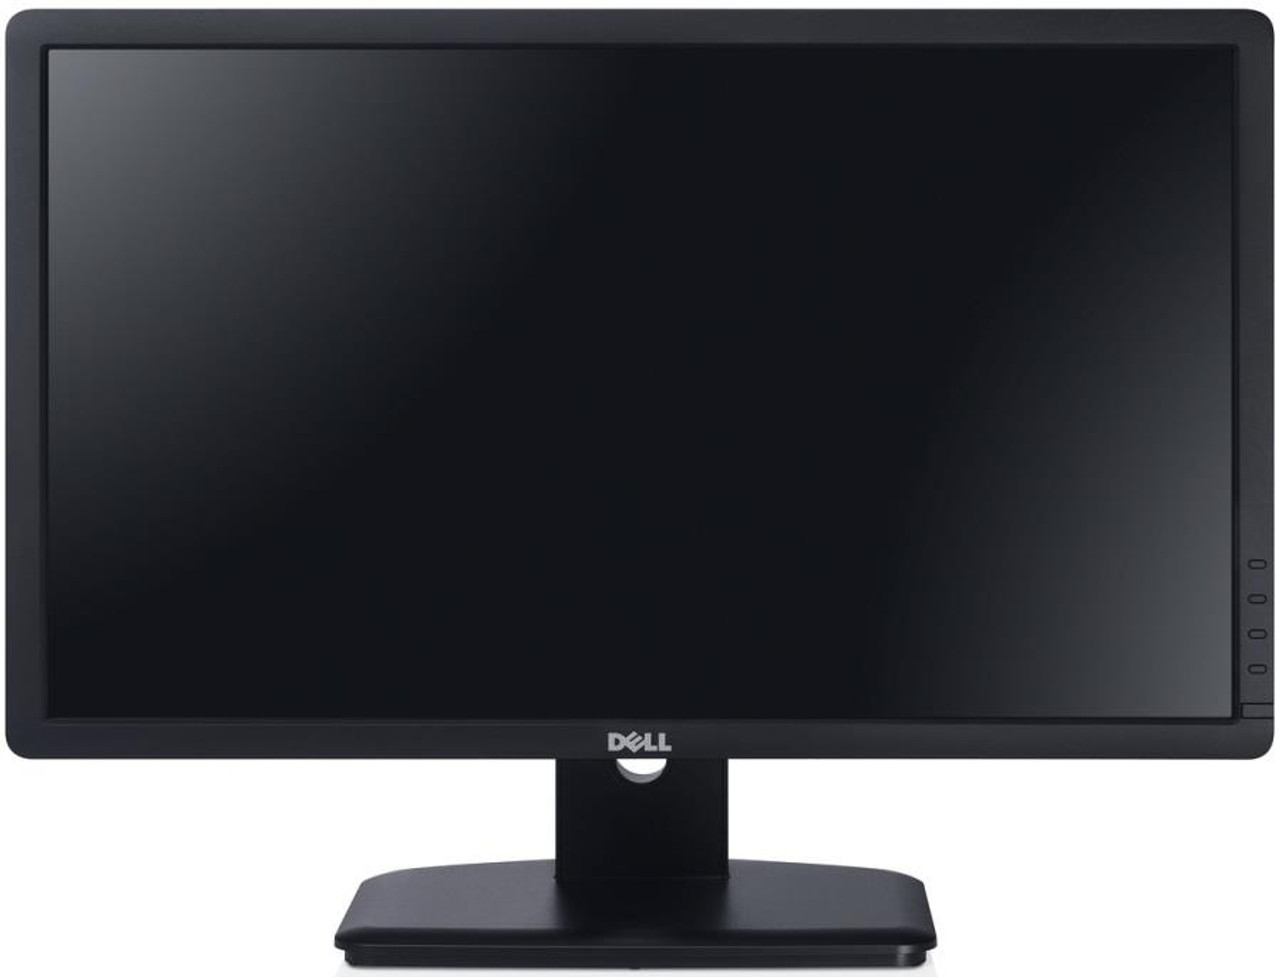 469-3938 - Dell E2213H 21.5-Inch (1920 X 1080) at 60Hz Widescreen Full HD LED Monitor